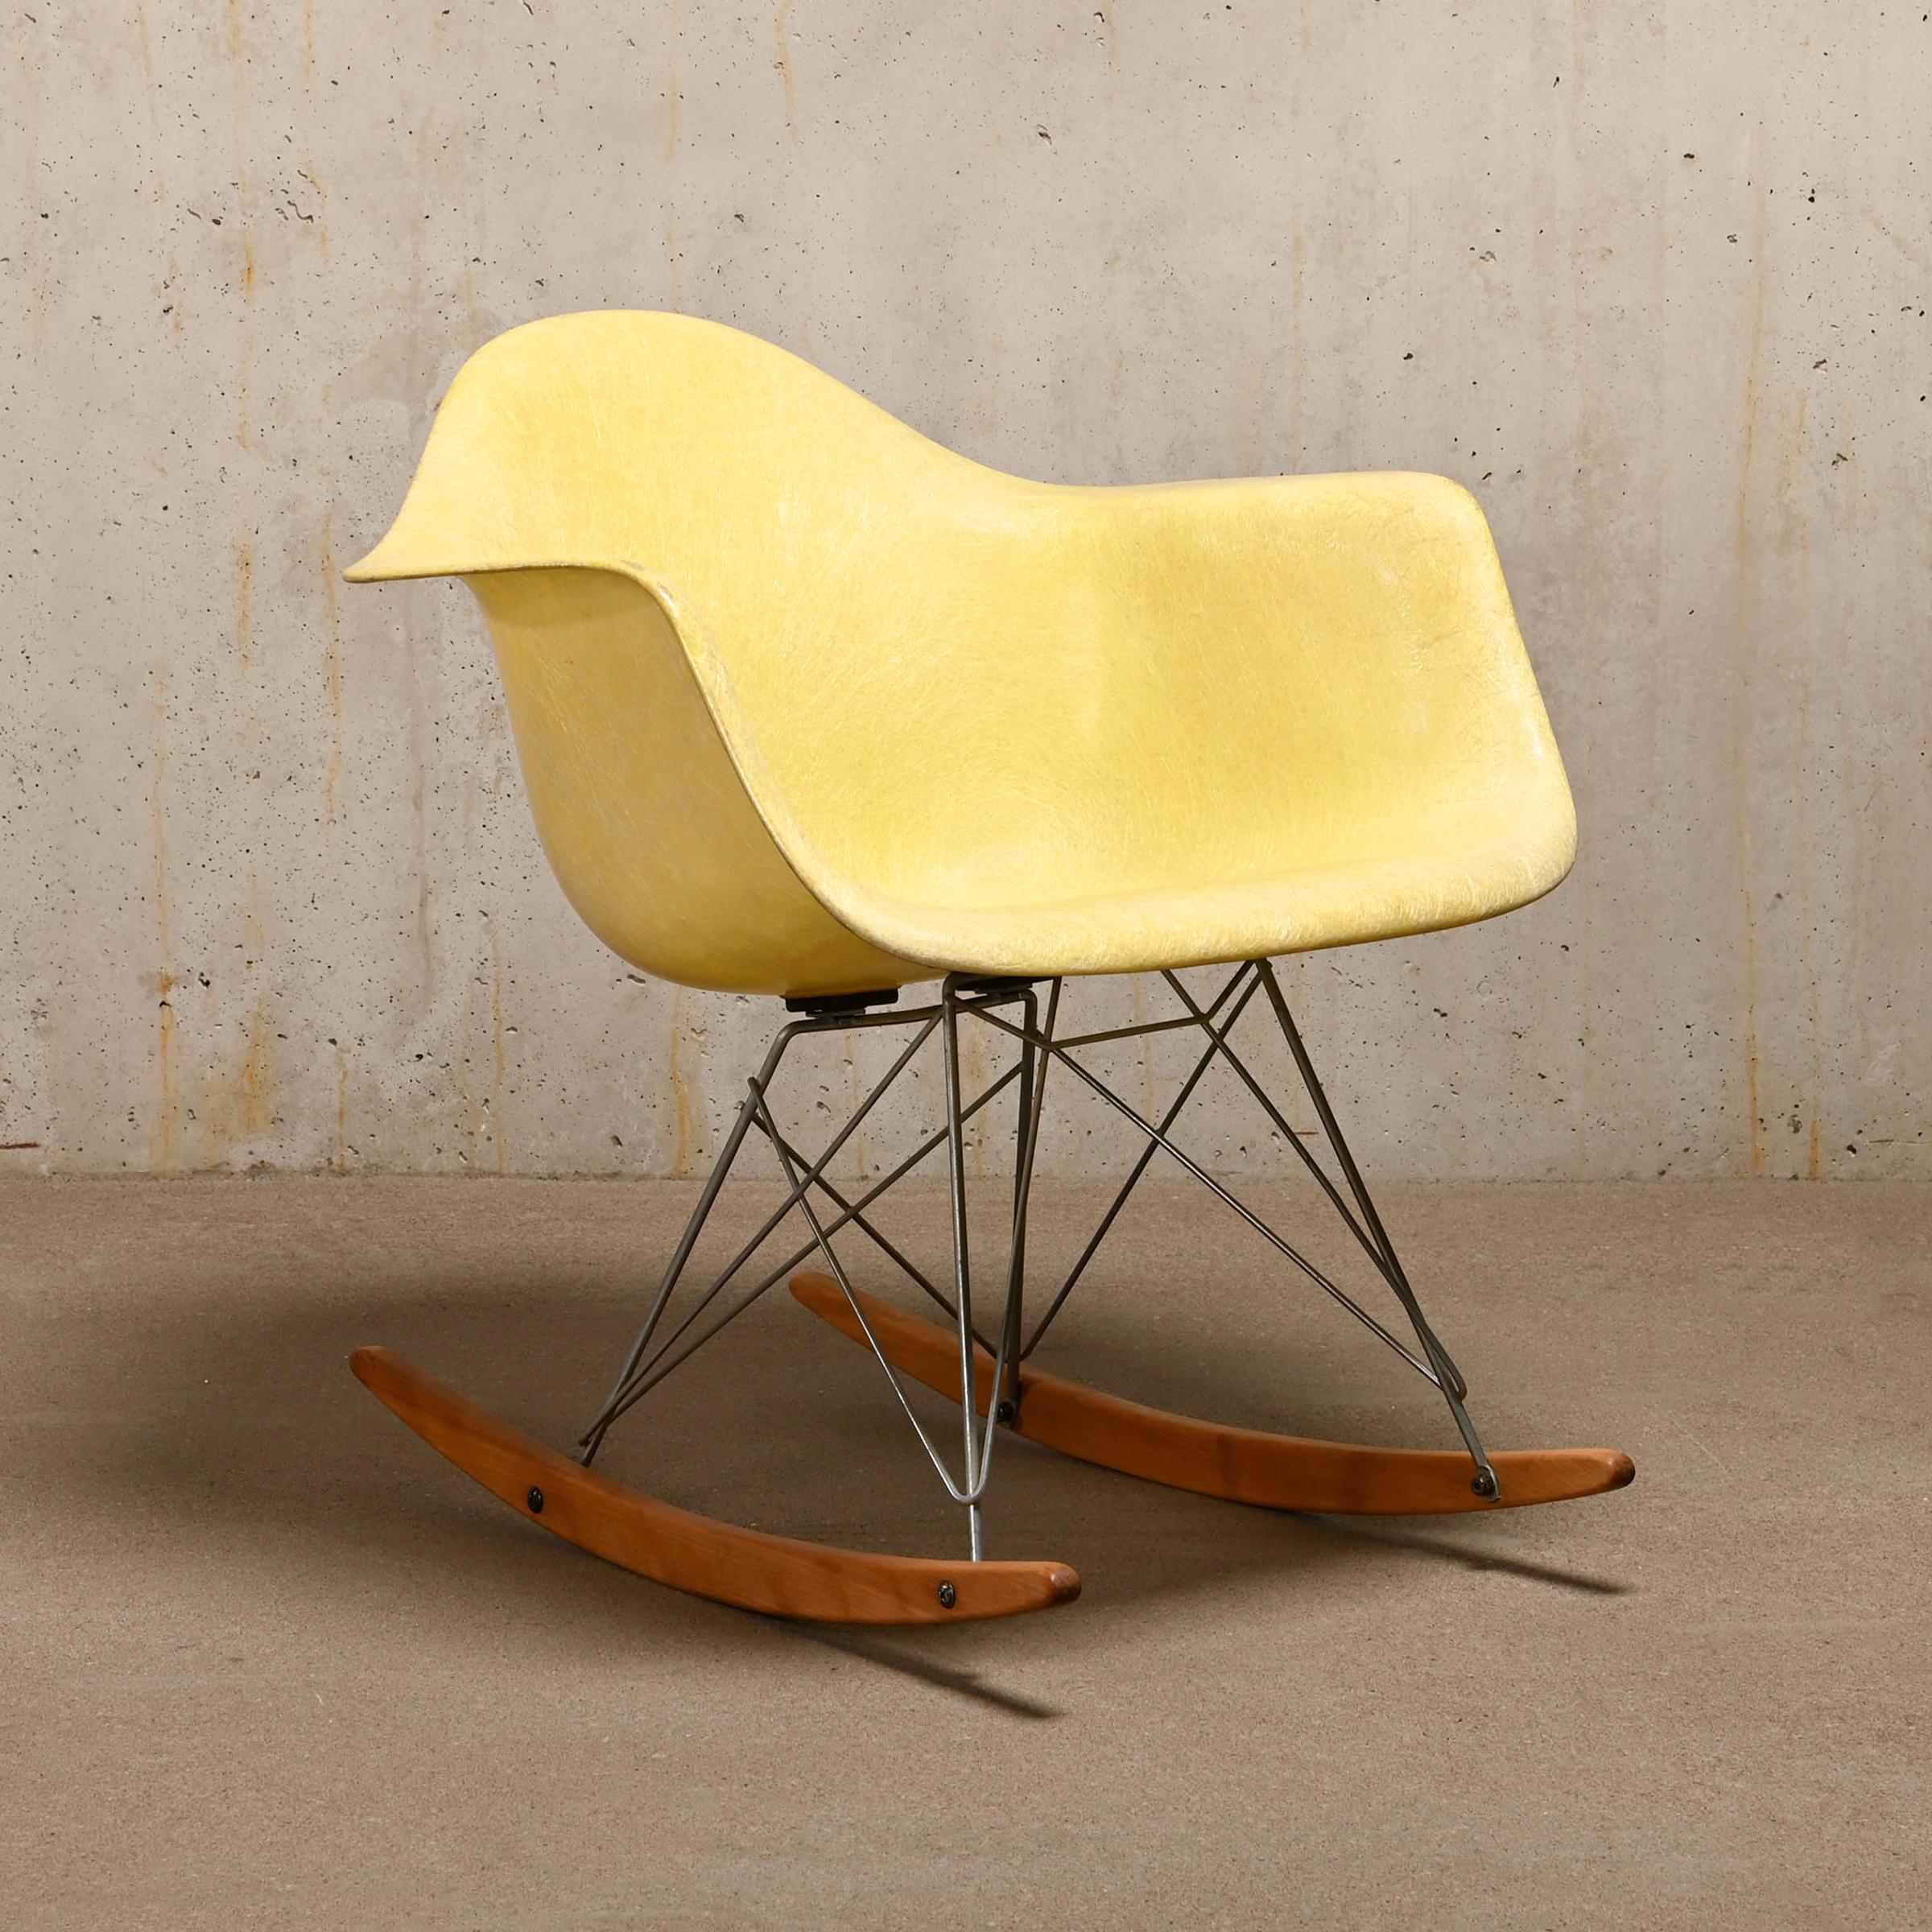 Iconic RAR rocking armchair designed by Charles and Ray Eames for Herman Miller / Zenith Plastics. Molded fiberglass shell in the colour Lemon Yellow with rope edge. Assembled on original zinc plated steel rocker rod base.
The chair is in very good